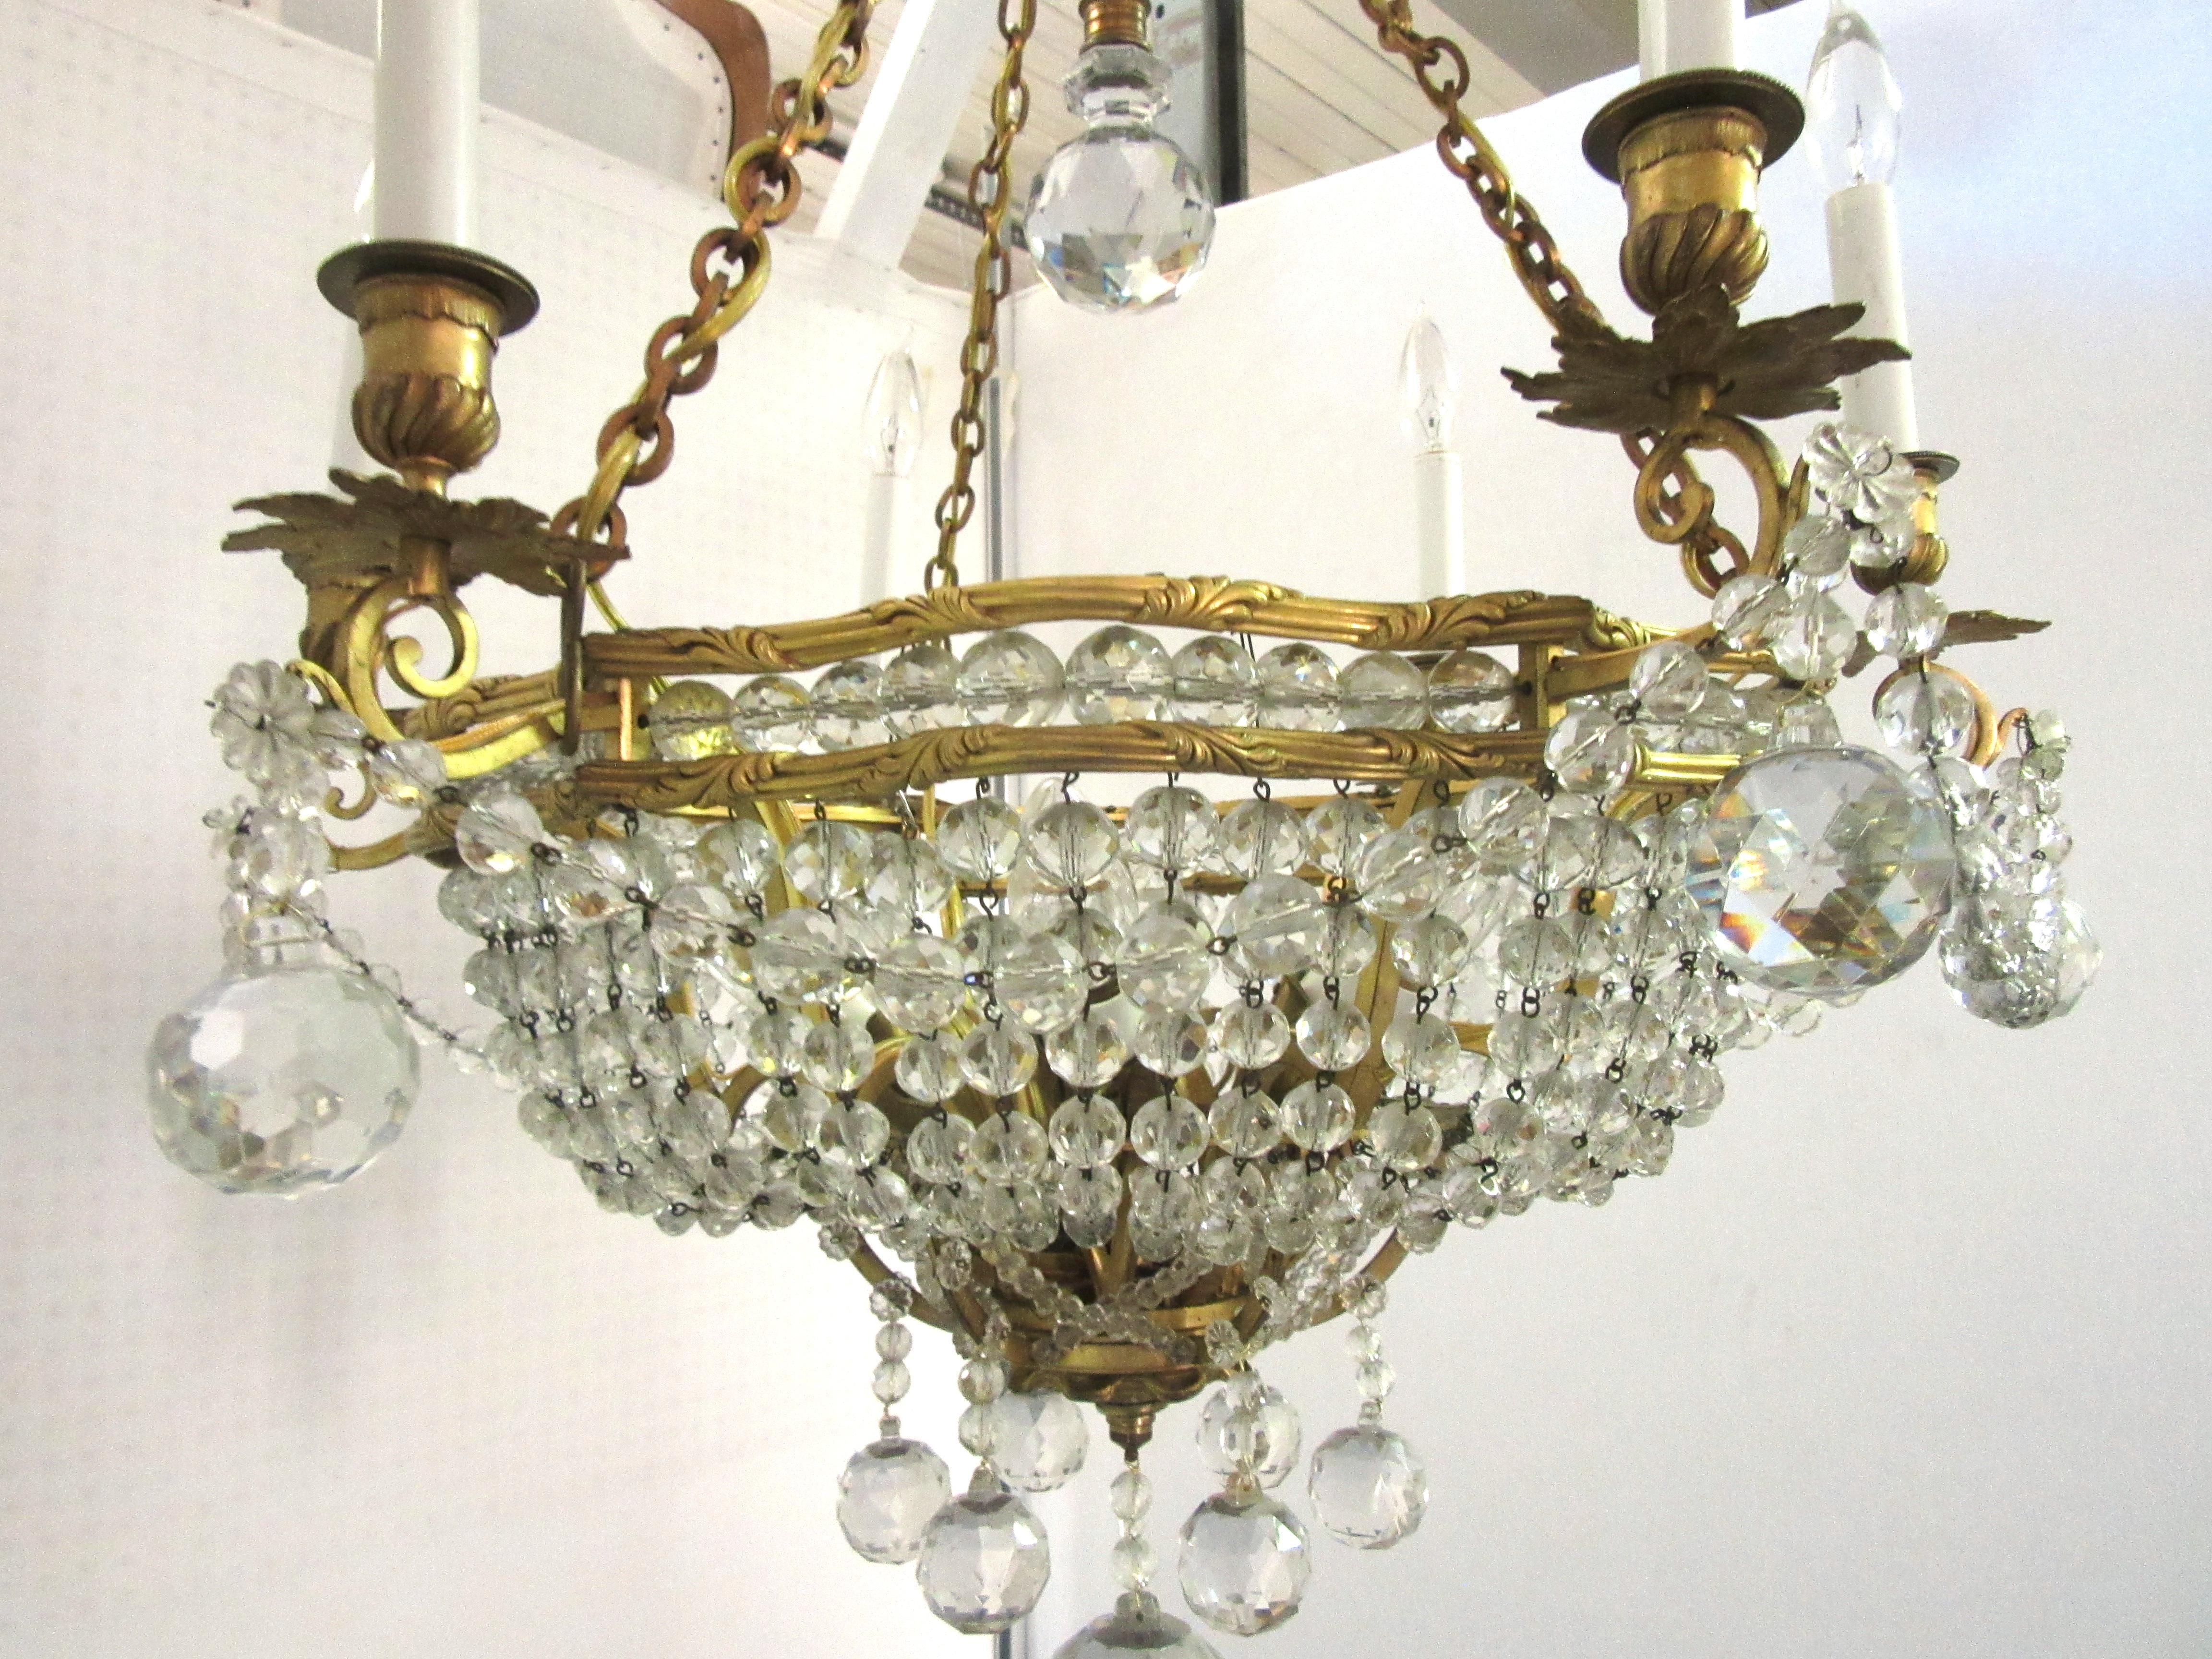 French Belle Époque gilt bronze chandelier with twelve lights. The piece has 18 cut crystal faceted spheres and numerous cut glass garlands. In great antique condition with age-appropriate wear and use. Recently restored to its original state.